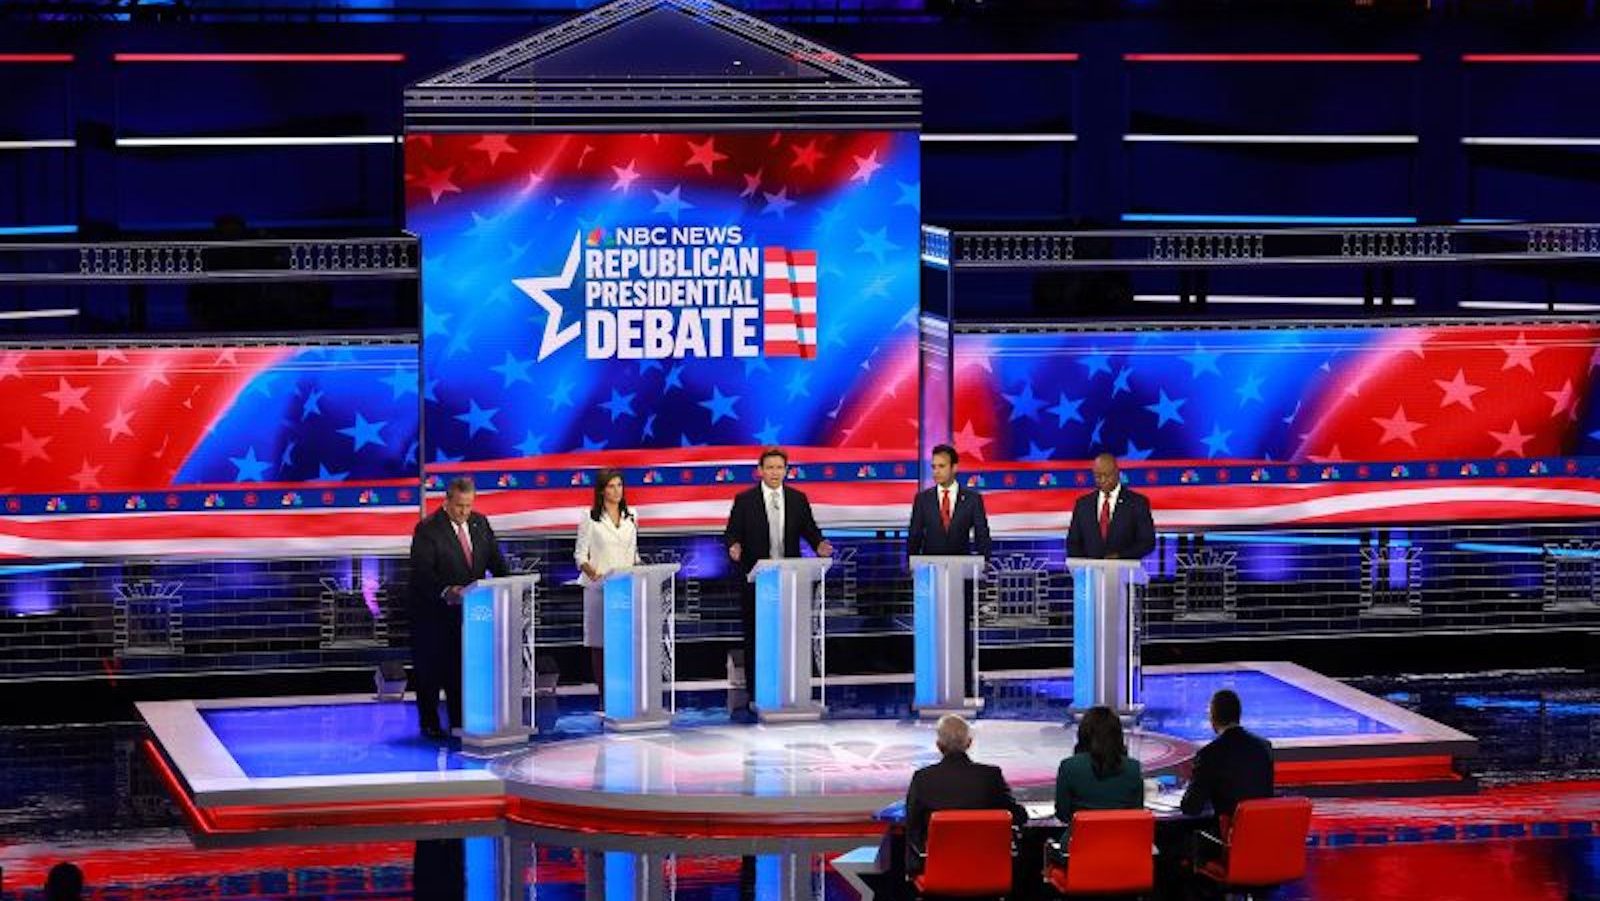 Takeaways from the Third Republican Presidential Debate for President